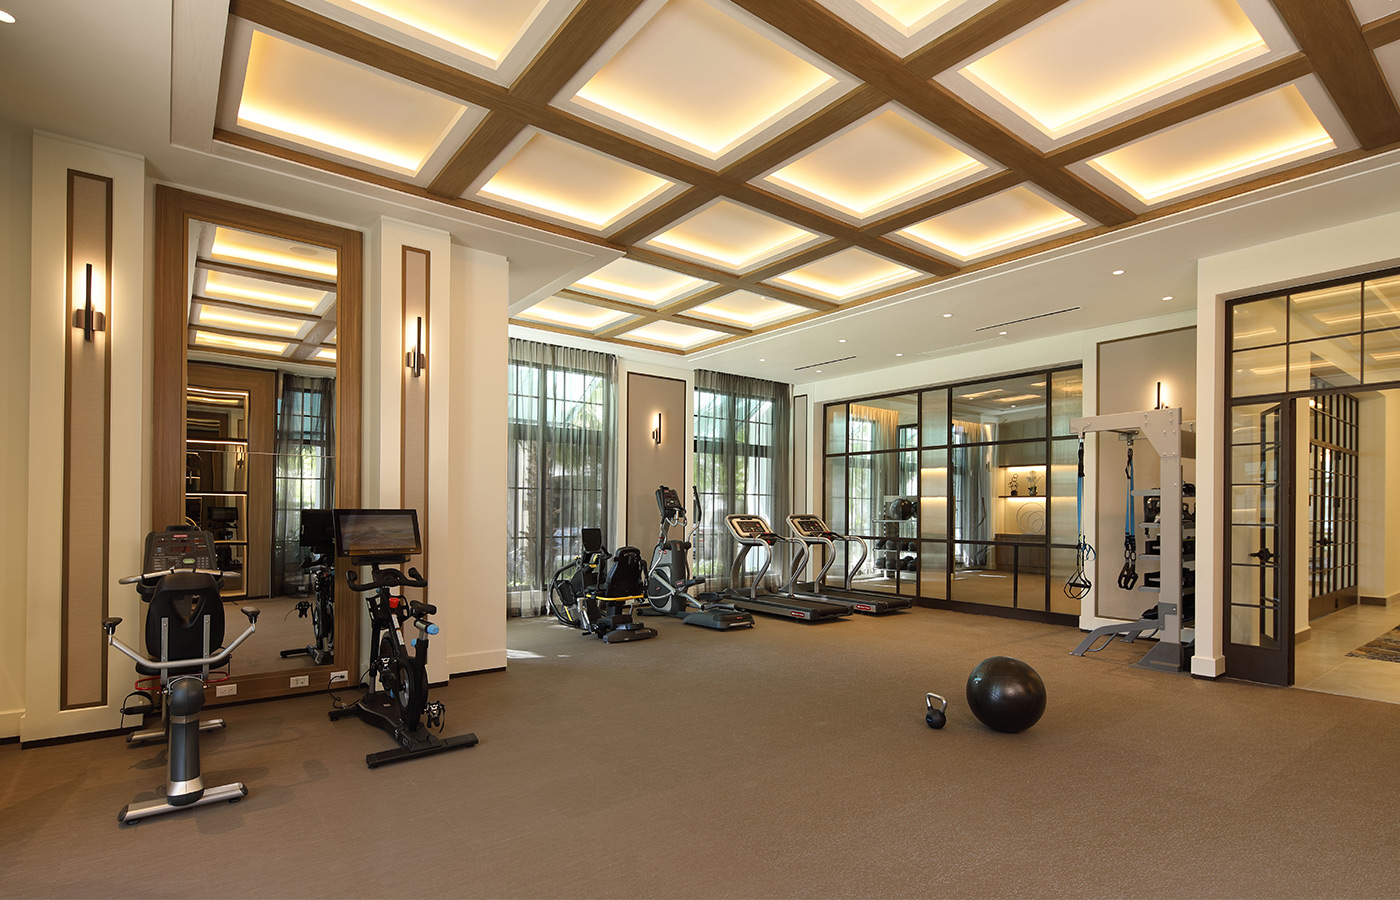 The fitness center with exercise equipment.